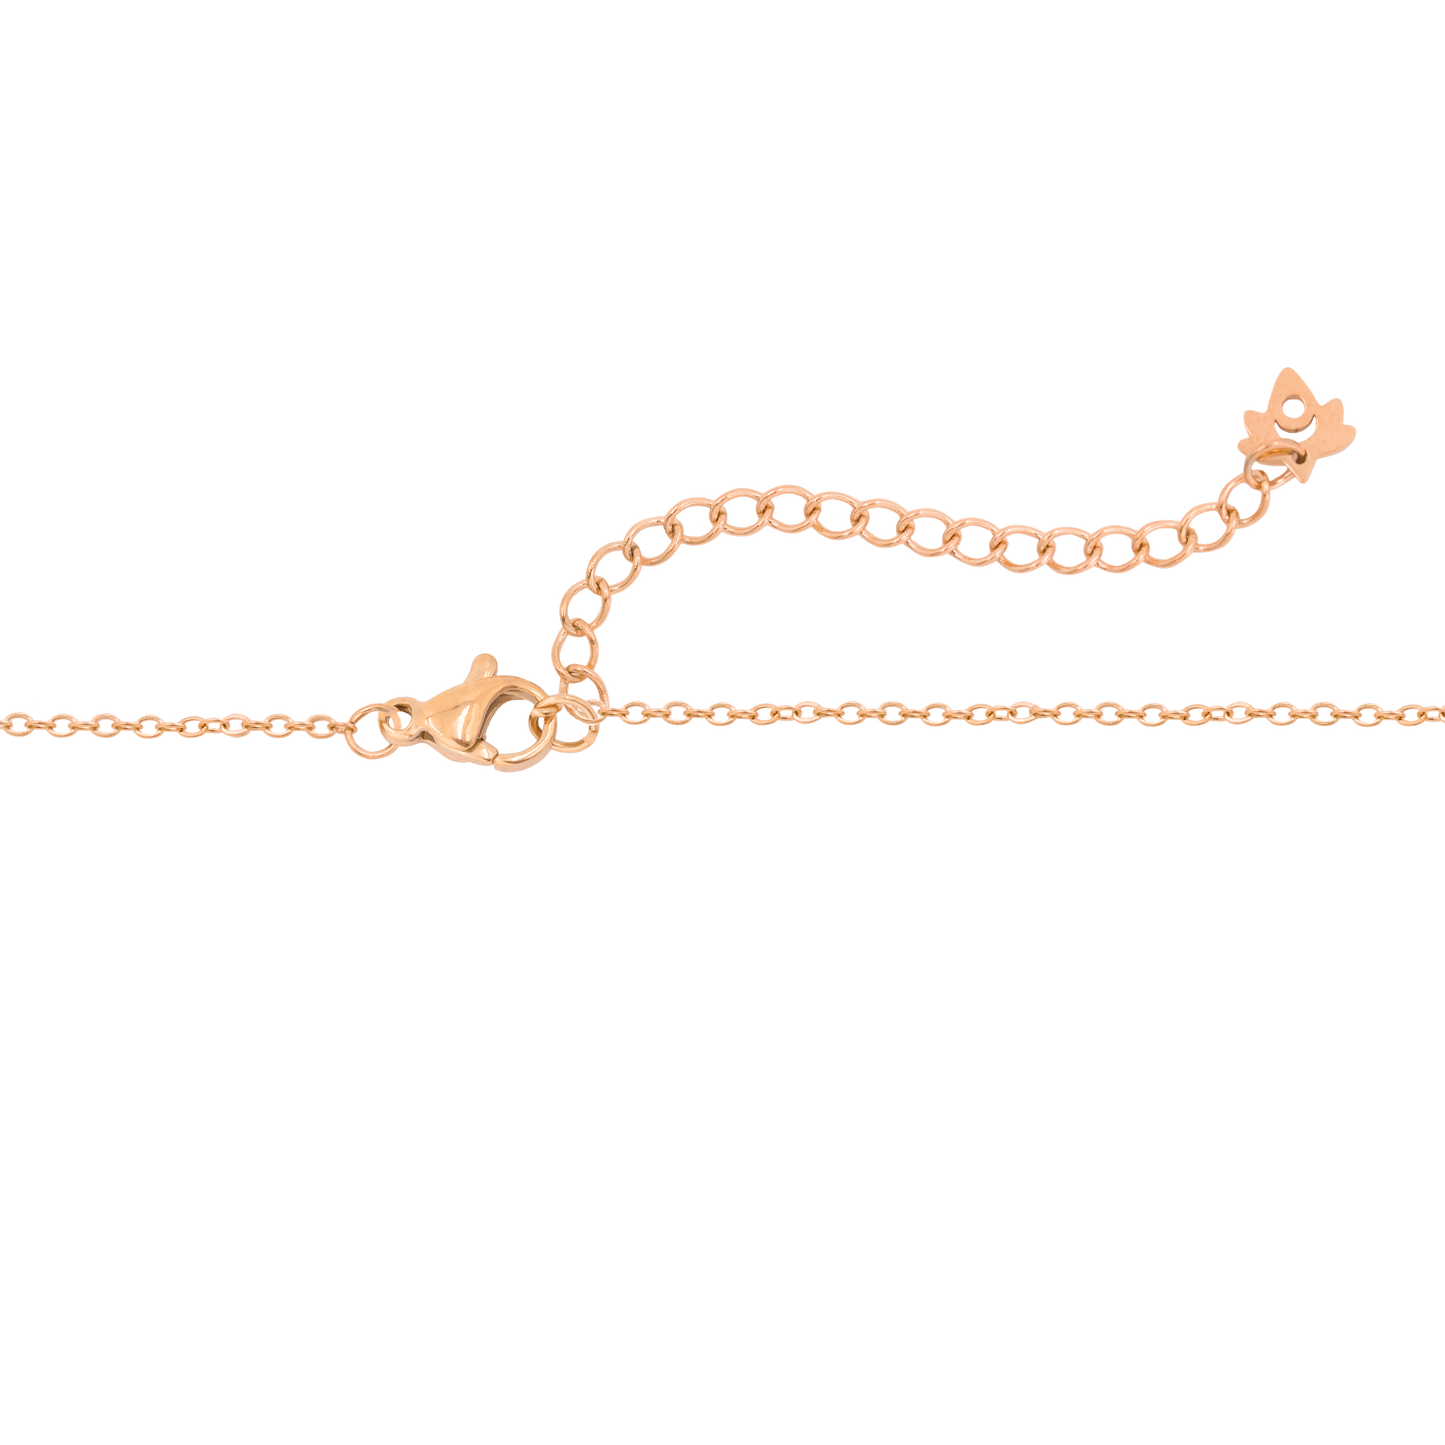 Flower 'n' Beads Necklace Rose Gold